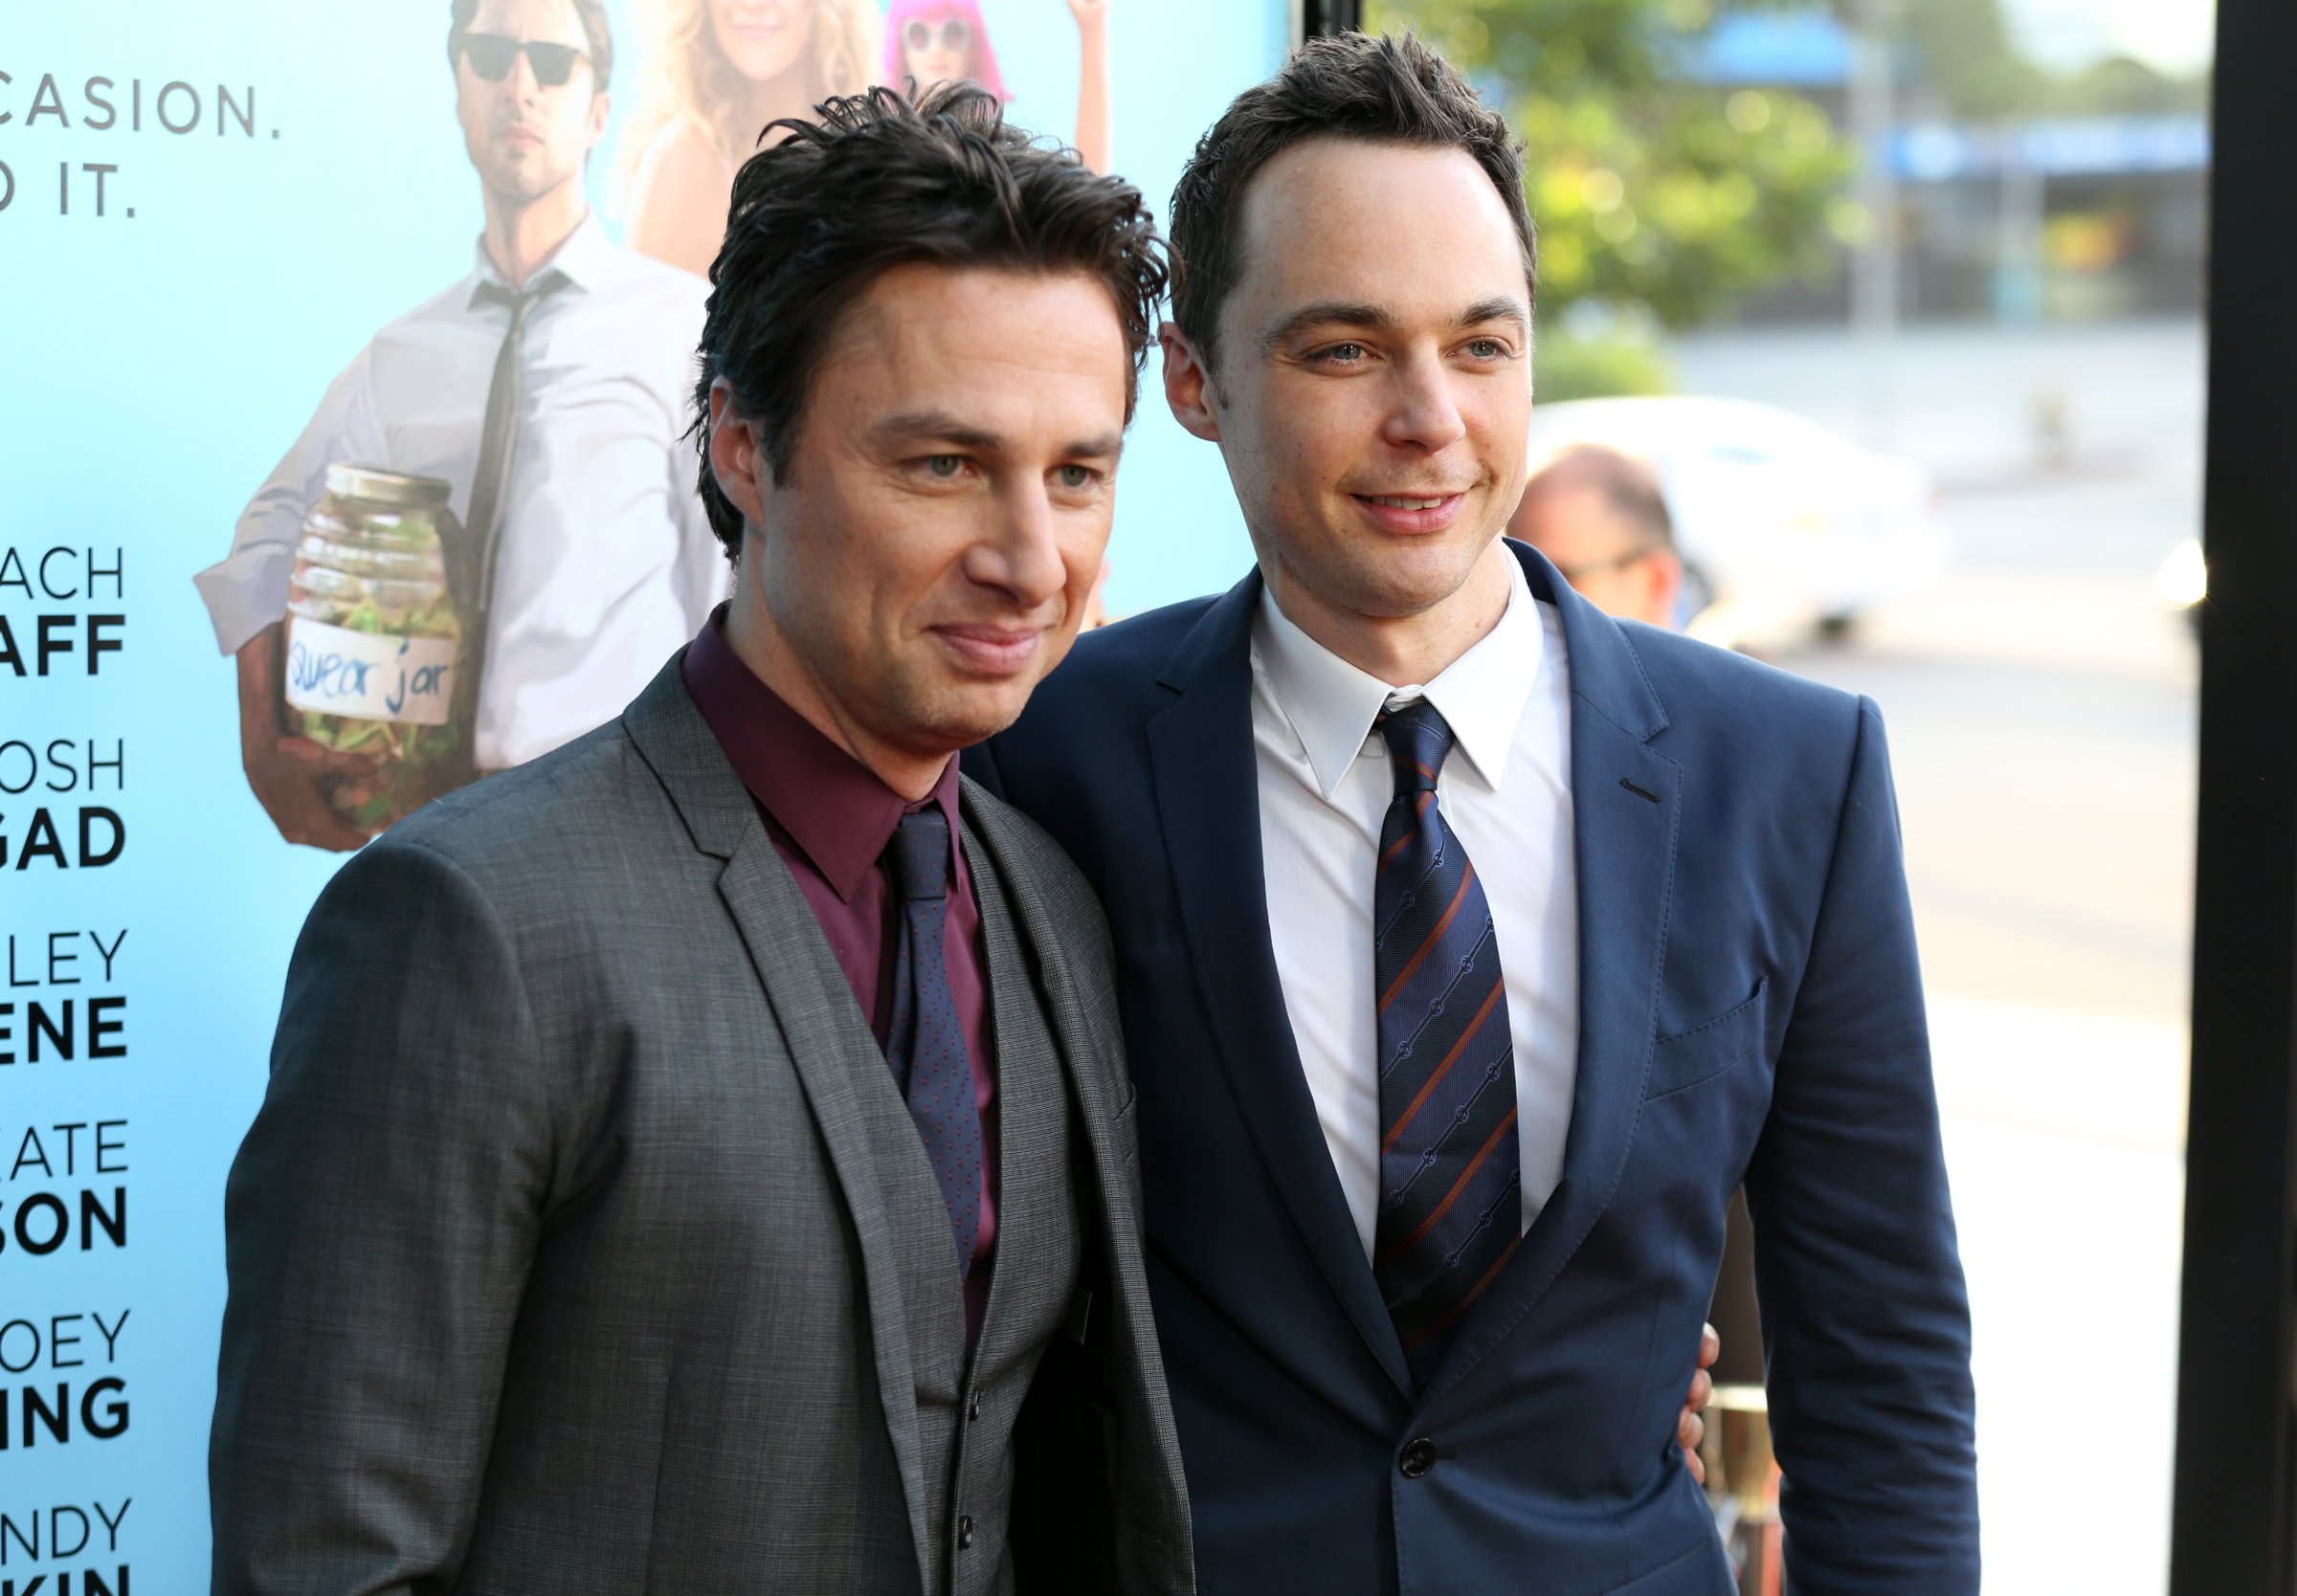 Zach Braf and Jim Parsons at the Los Angeles premiere of Wish I Was Here